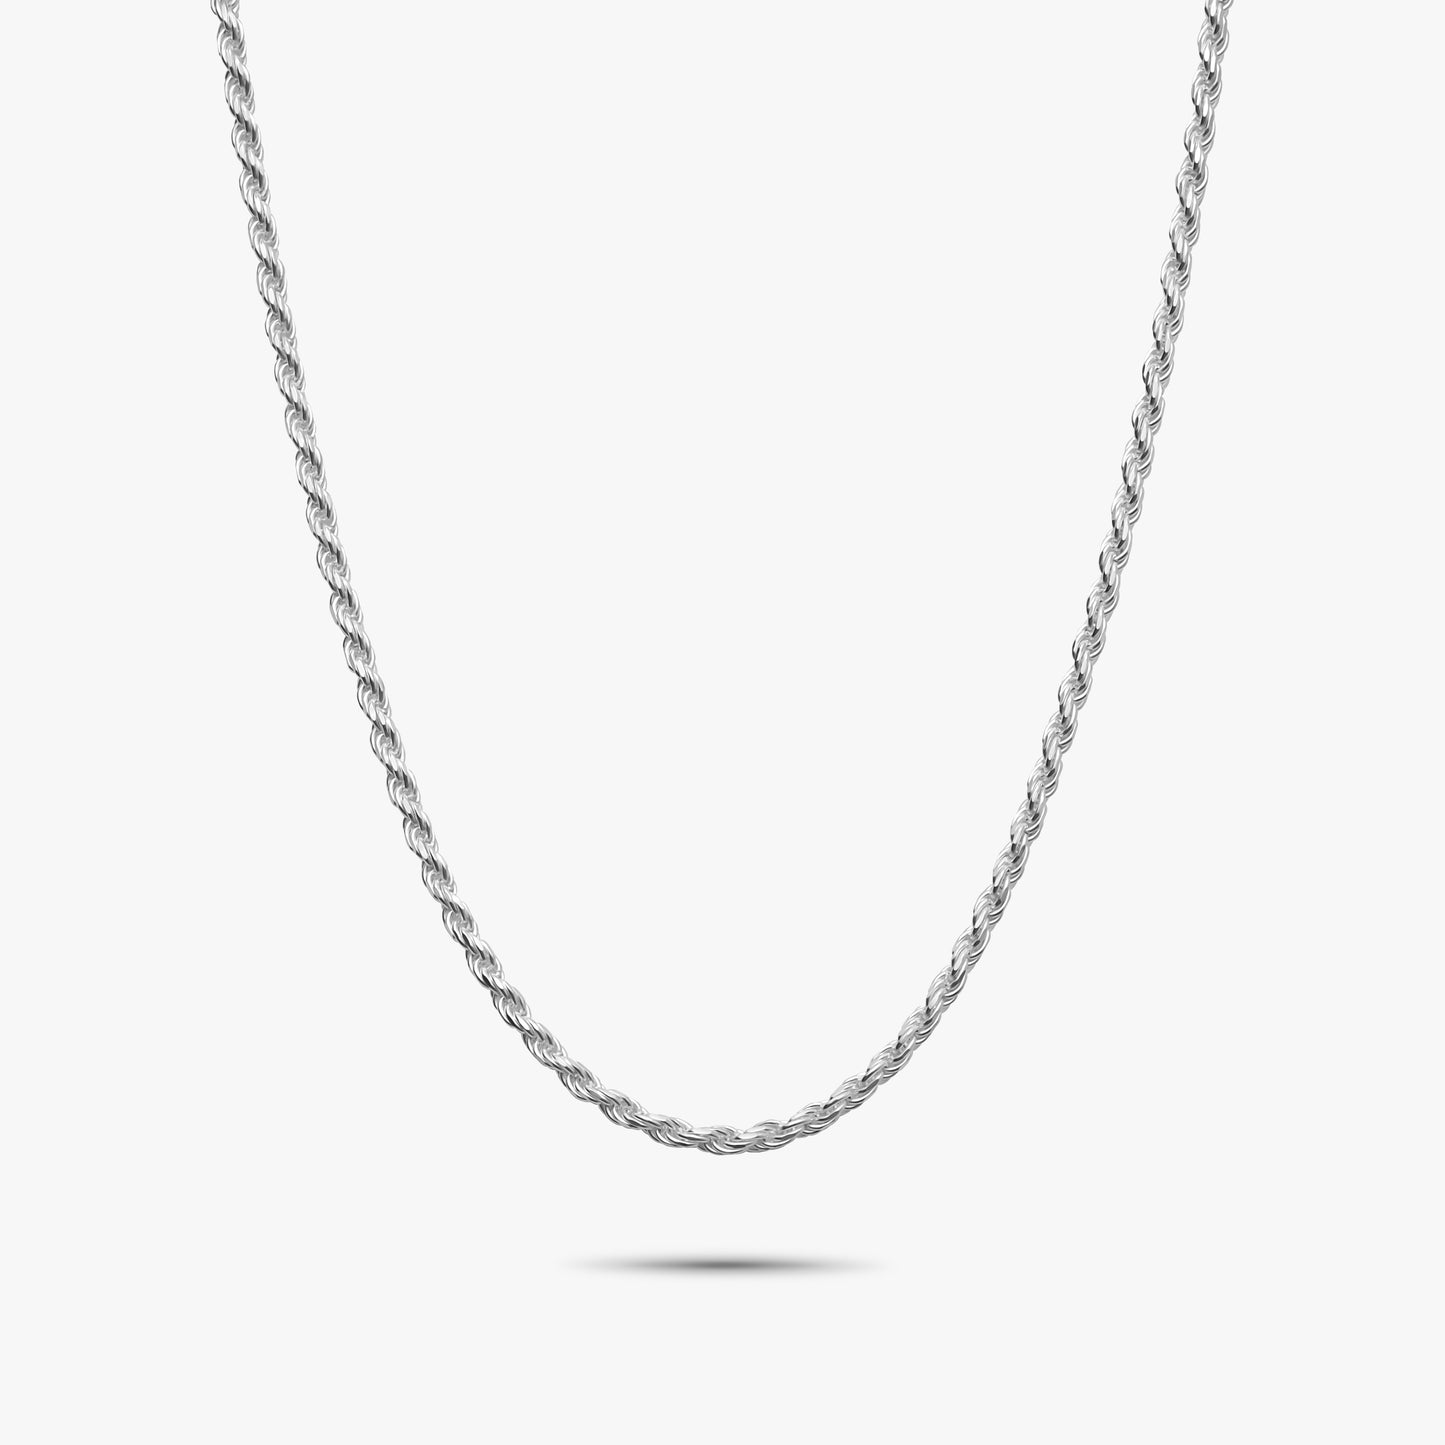 1.8mm sterling silver diamond cut rope chain